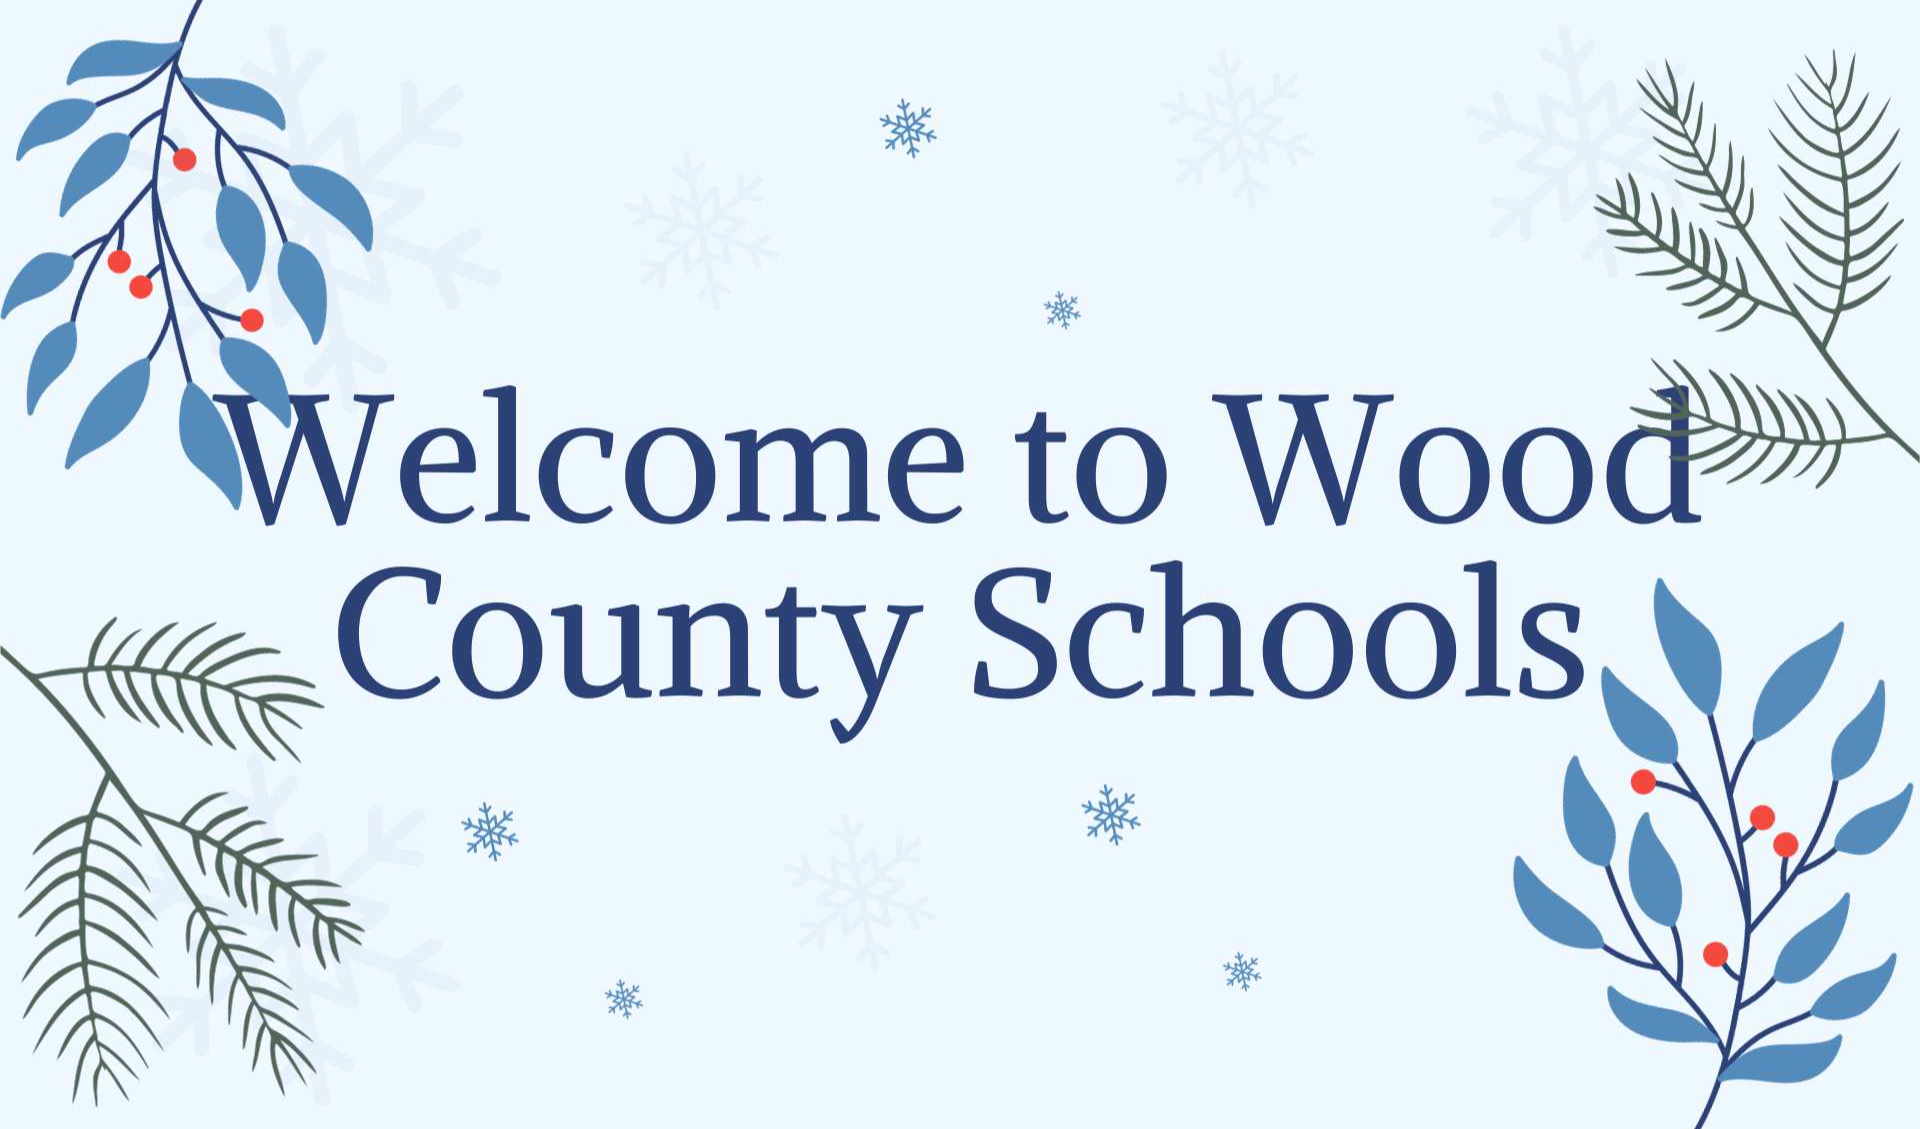 welcome to wood county schools text on a light blue background with snowflakes and winter themed plants